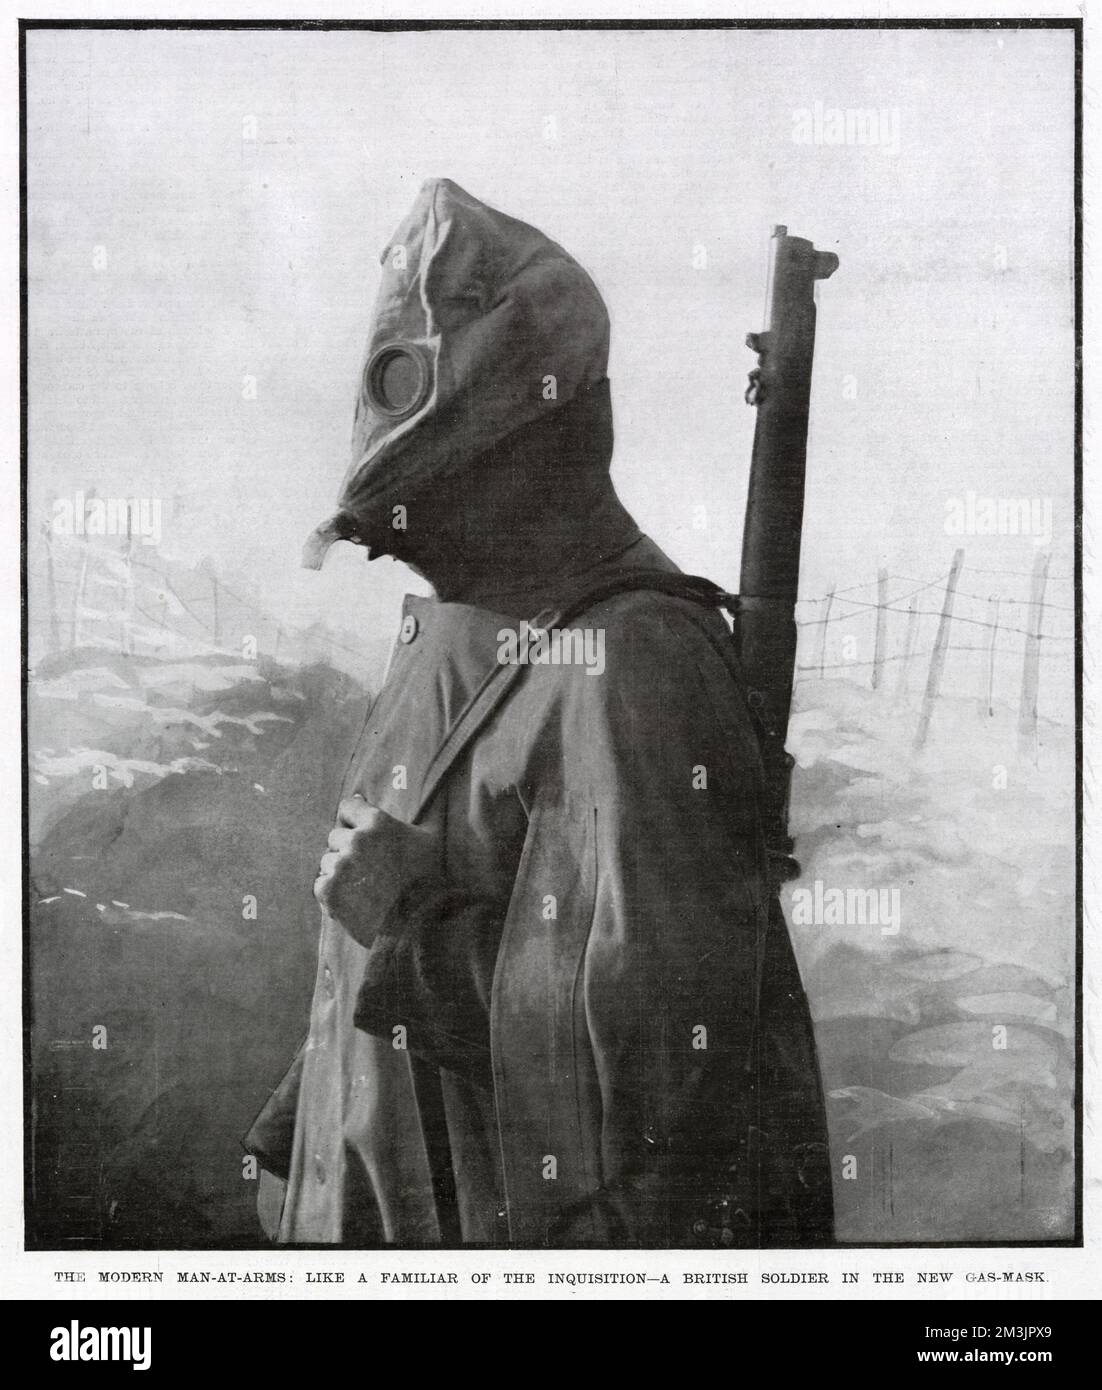 A British soldier wearing a new gas mask. Following the German use of poisonous gas at Ypres on 22nd April 1915, it became a common feature of World War I warfare, necessitating the wearing of gas masks among soldiers on both sides. Stock Photo